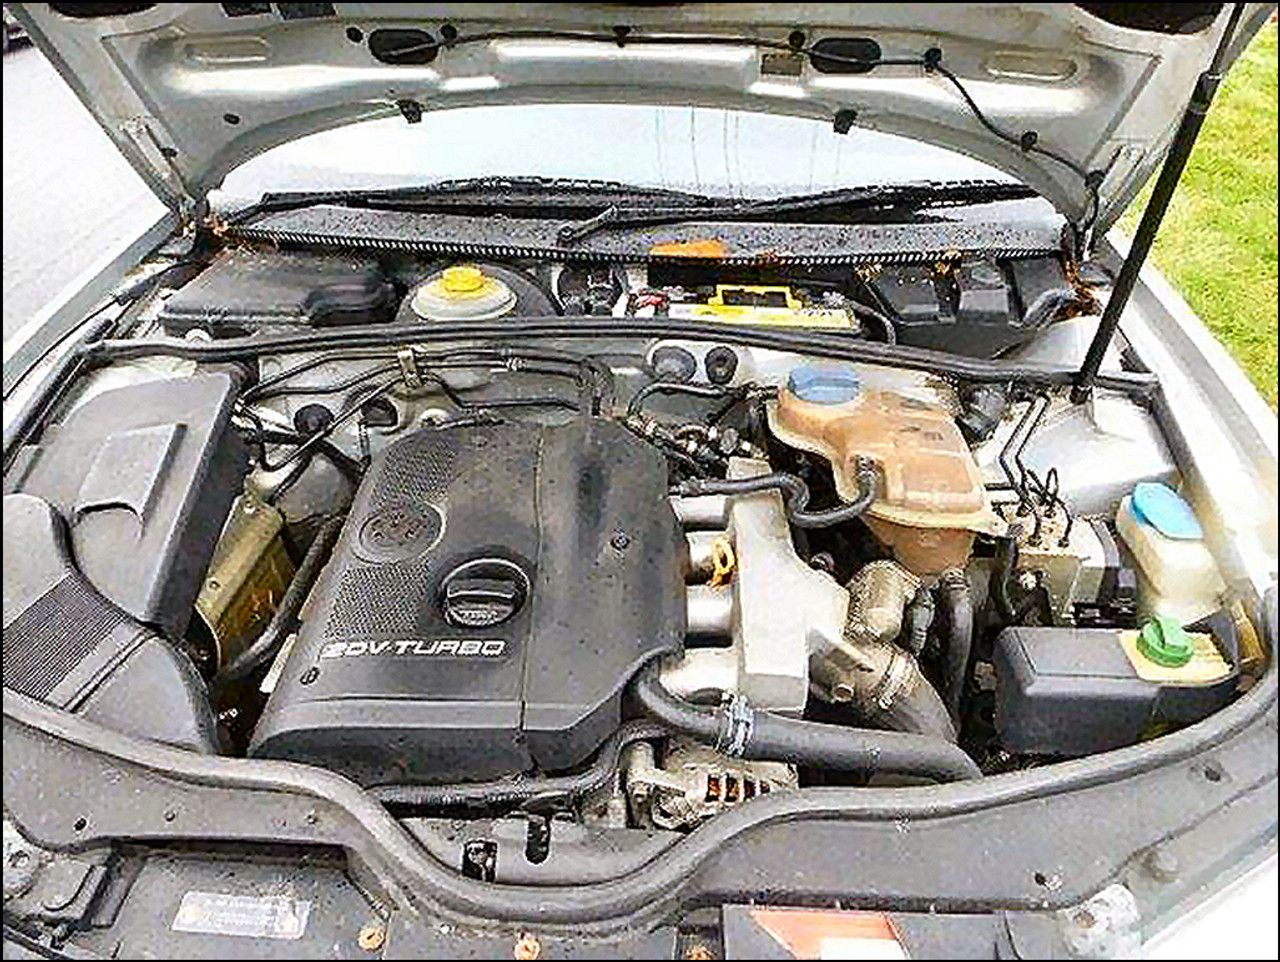 Buying advice Volkswagen Passat (B5/B5.5) 1996-2005, Common Issues,  Engines, Inspection 